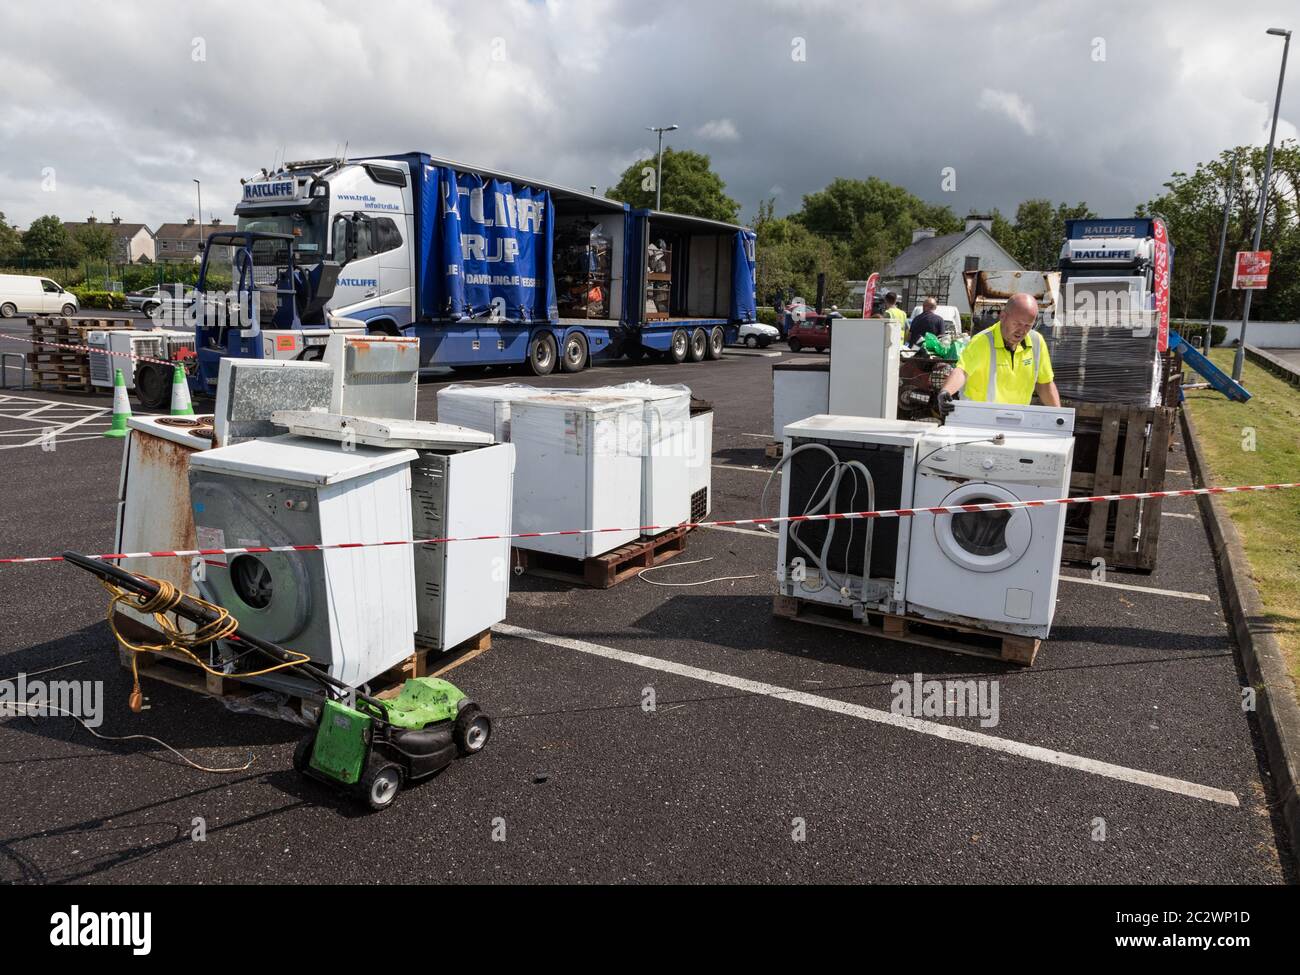 Listowel, Ireland - 19th July 2019: Electronics waste collection event for recycling in the town of Listowel, Republic of Ireland Stock Photo